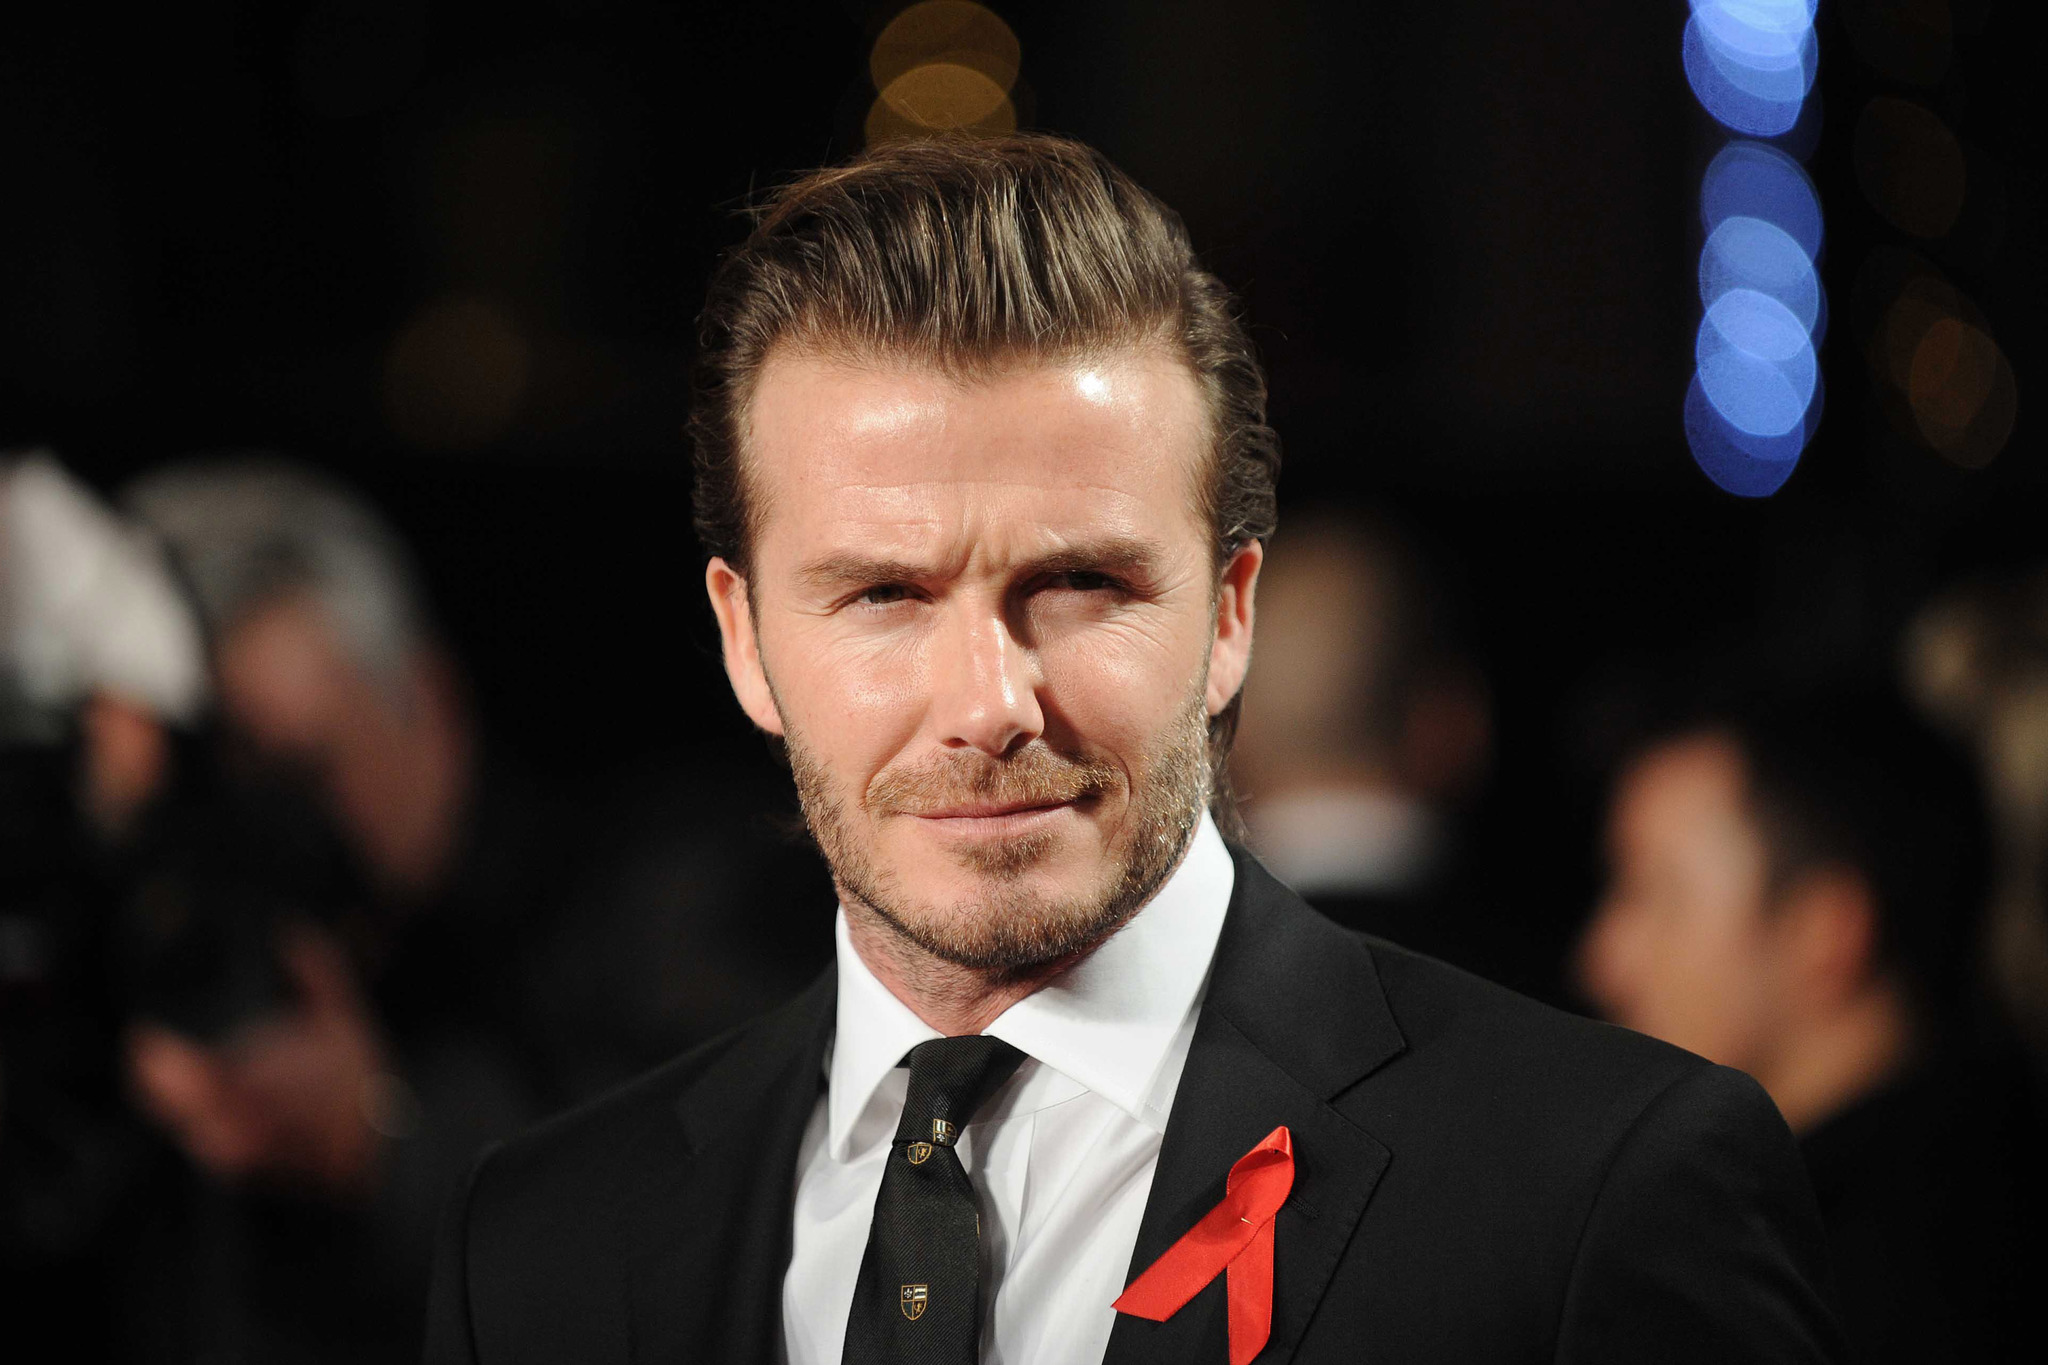 David Beckham at event of The Class of 92 (2013)